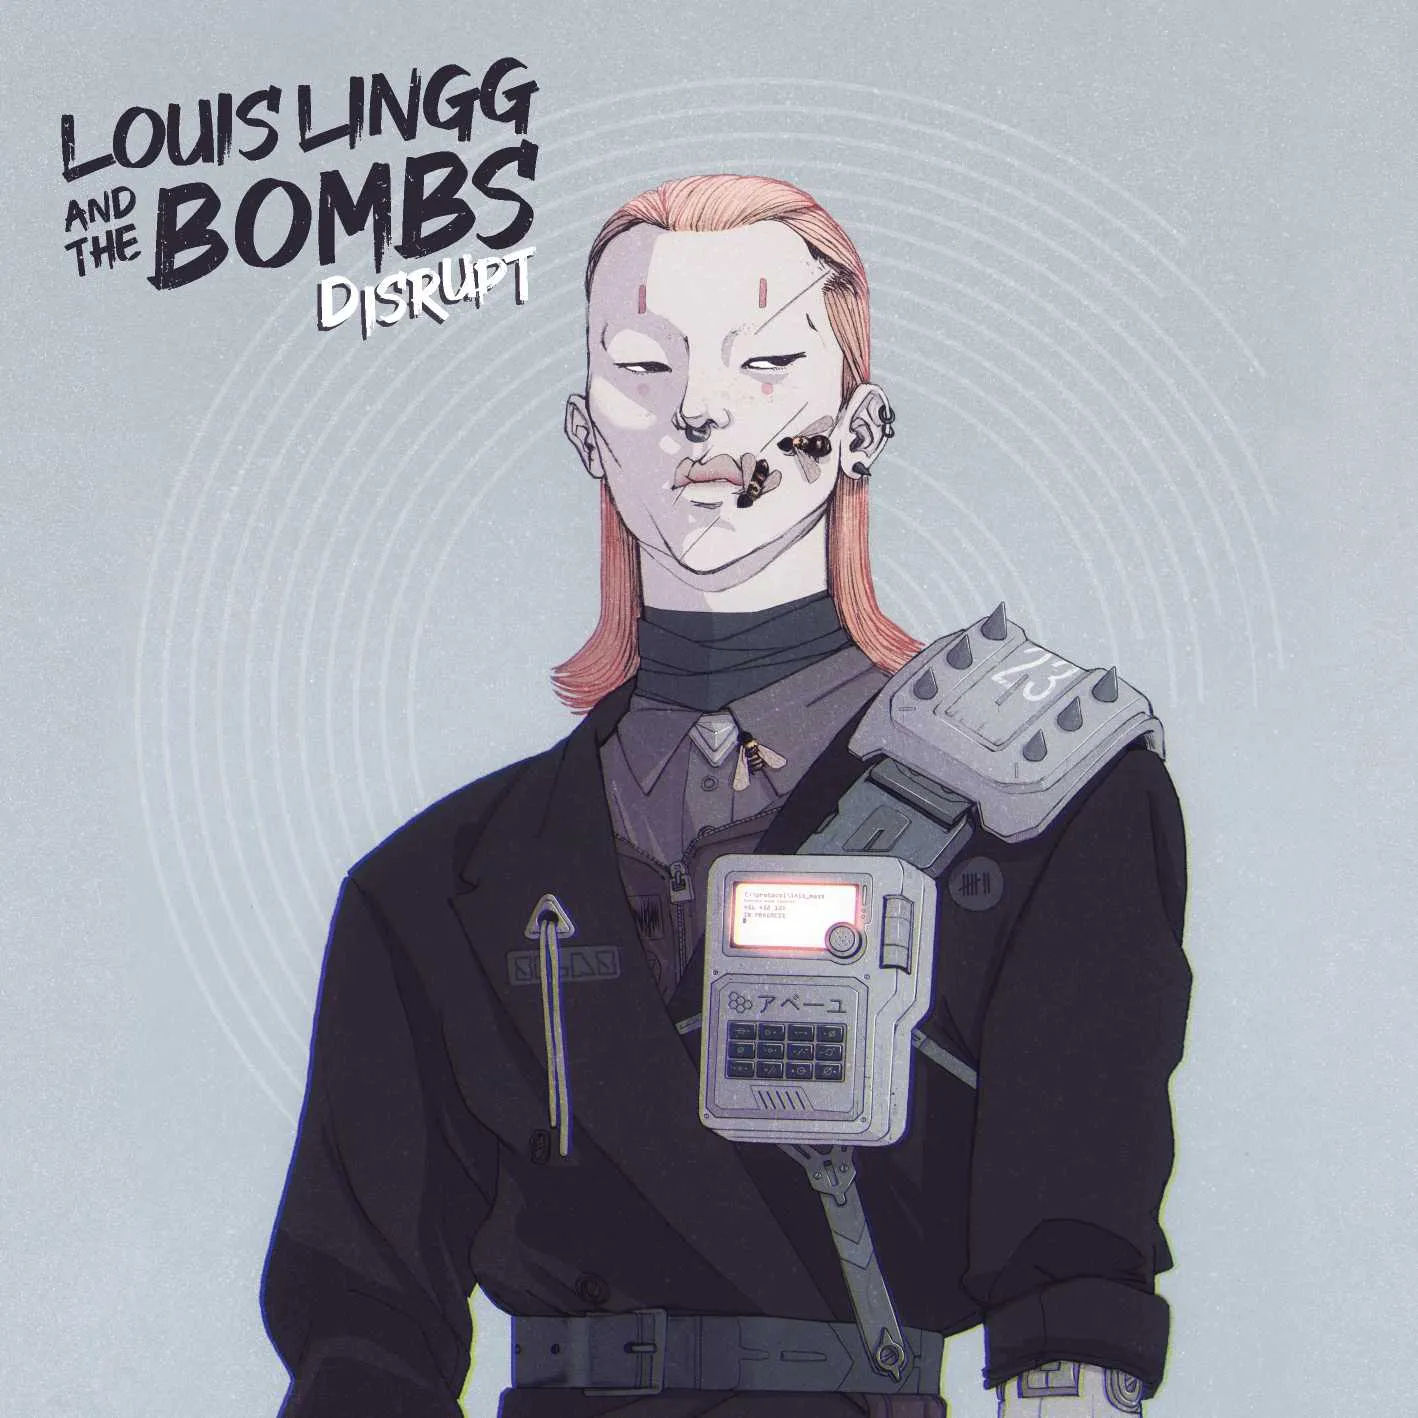 Album cover for “Disrupt” by Louis Lingg and The Bombs